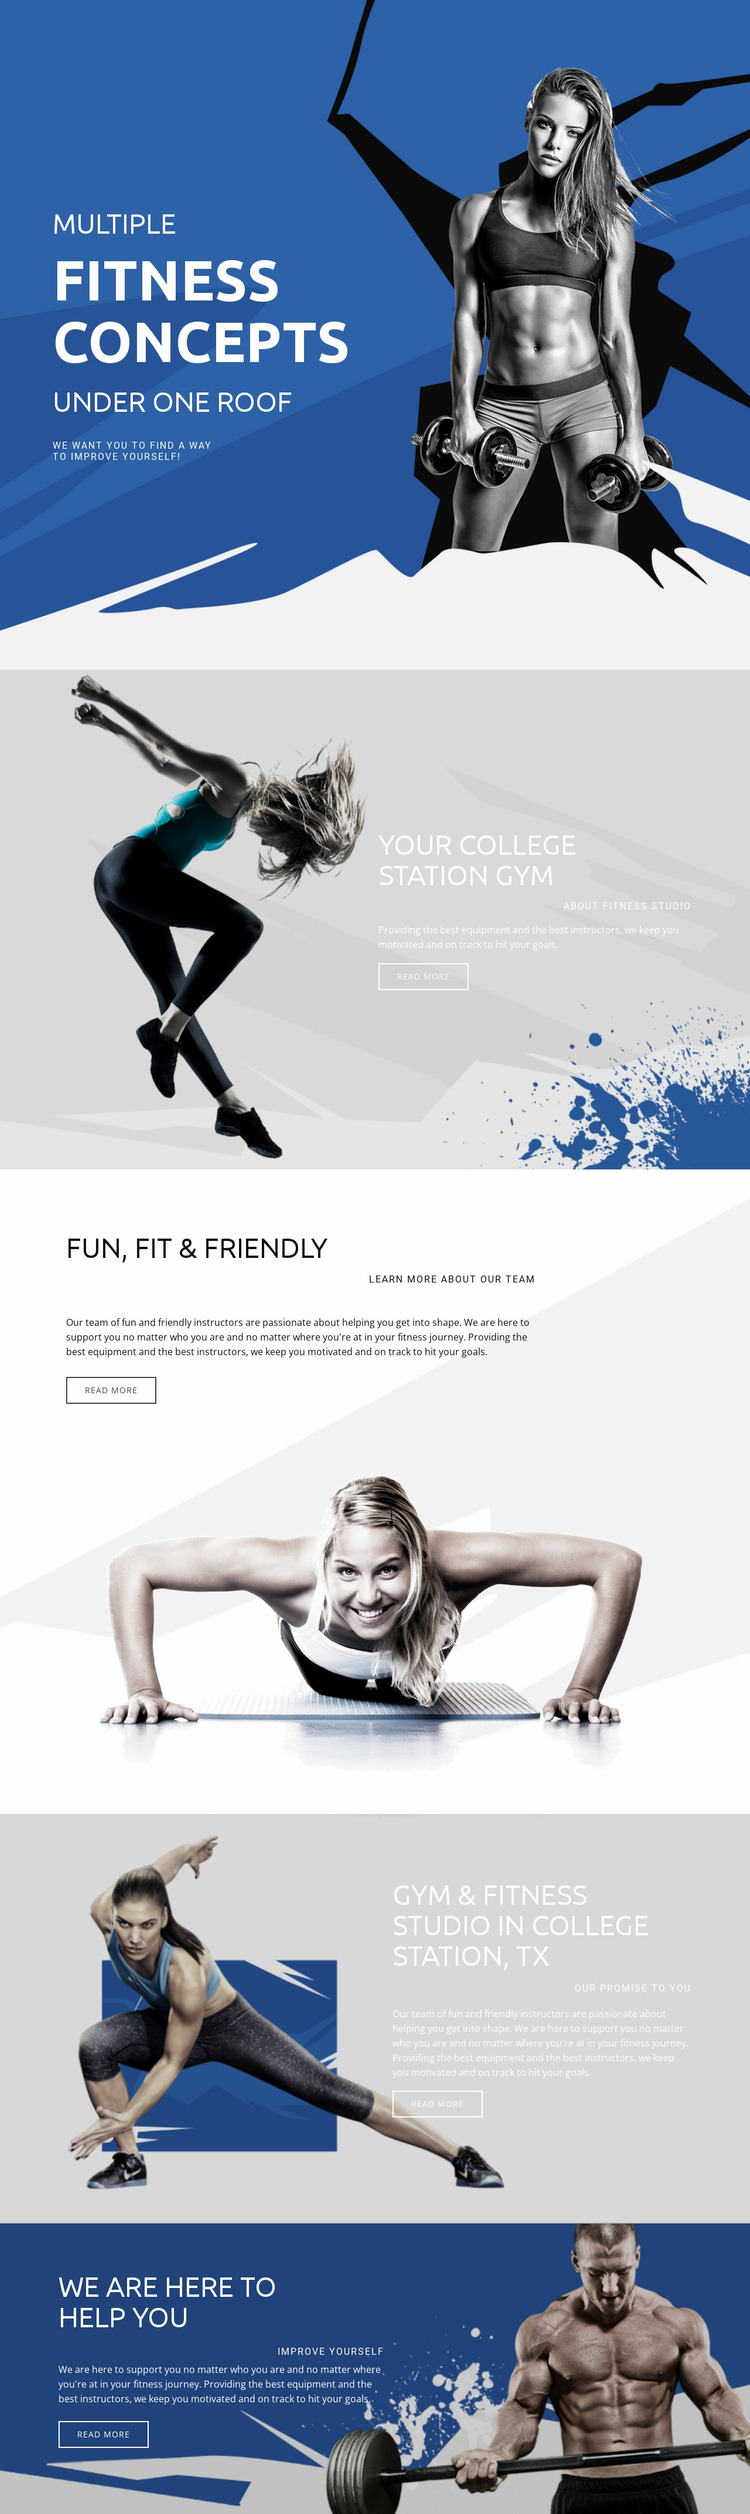 Best fitness and sports Website Mockup